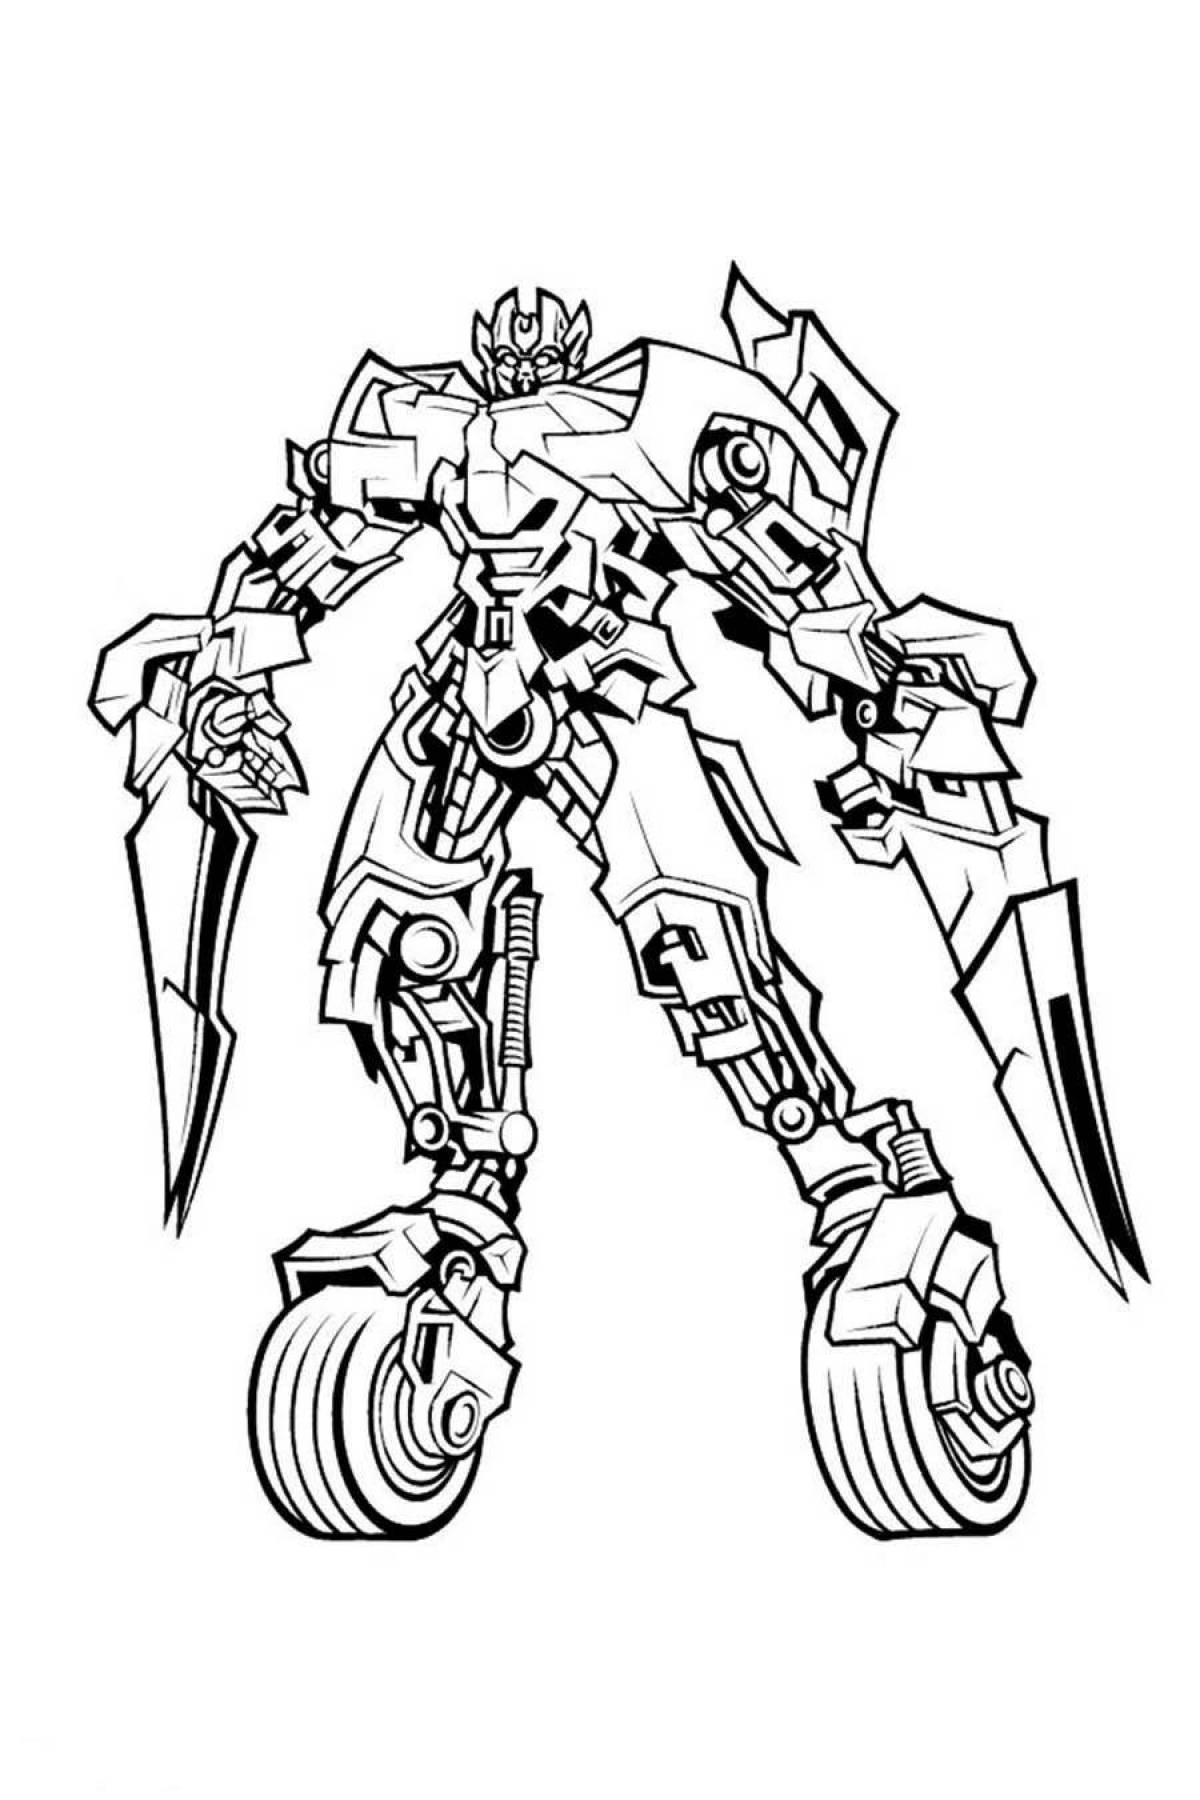 Dazzling transformers coloring pages for boys